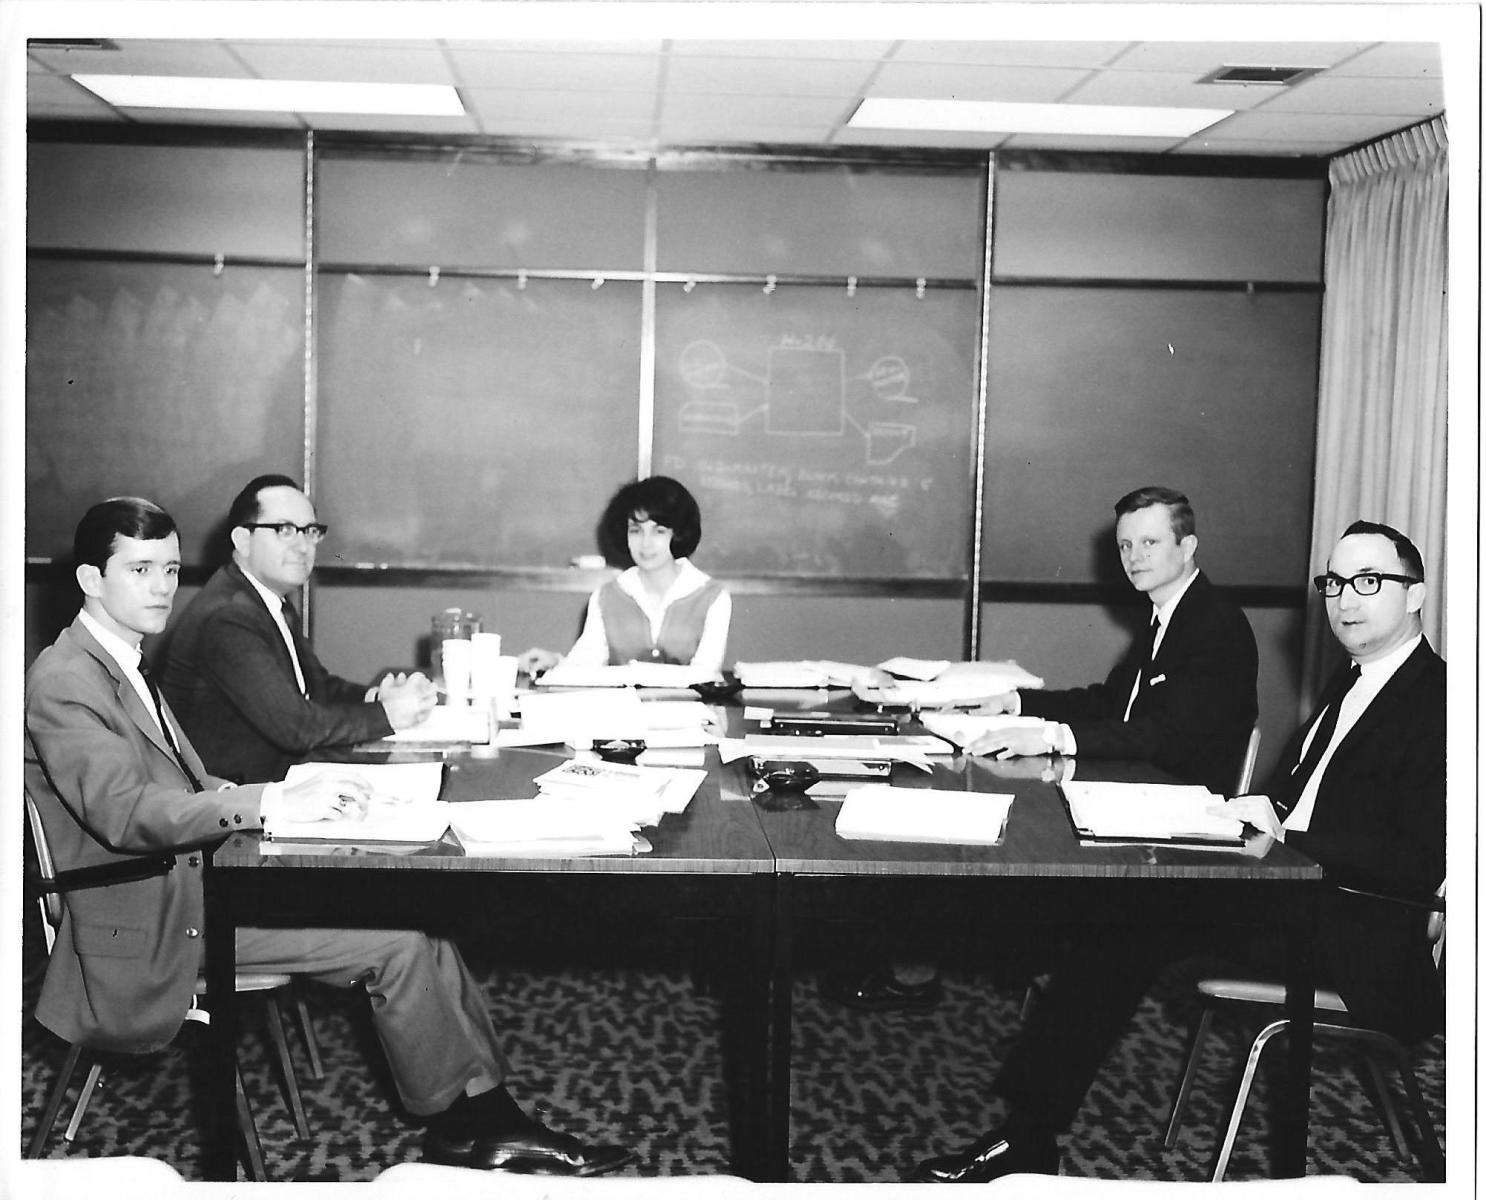 A black and white photo of four men and one woman at a paper-filled desk with a chalkboard with diagrams in the background. The men wear suits and the woman is wearing a white shirt with a vest, possibly a dress.